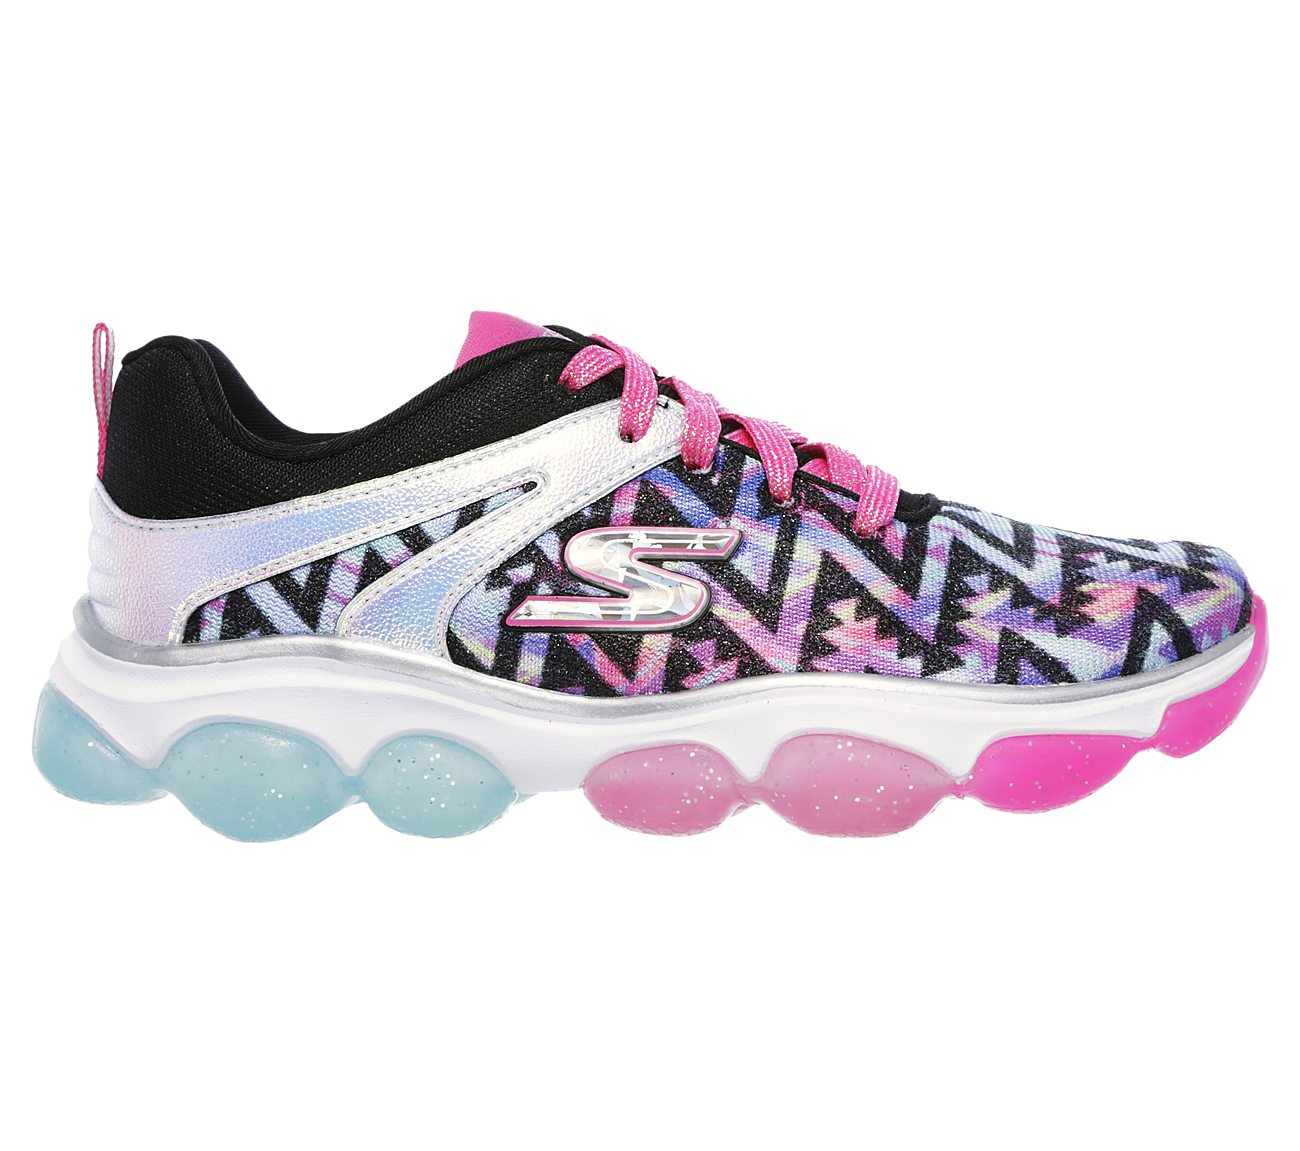 skechers multi colored running shoes 